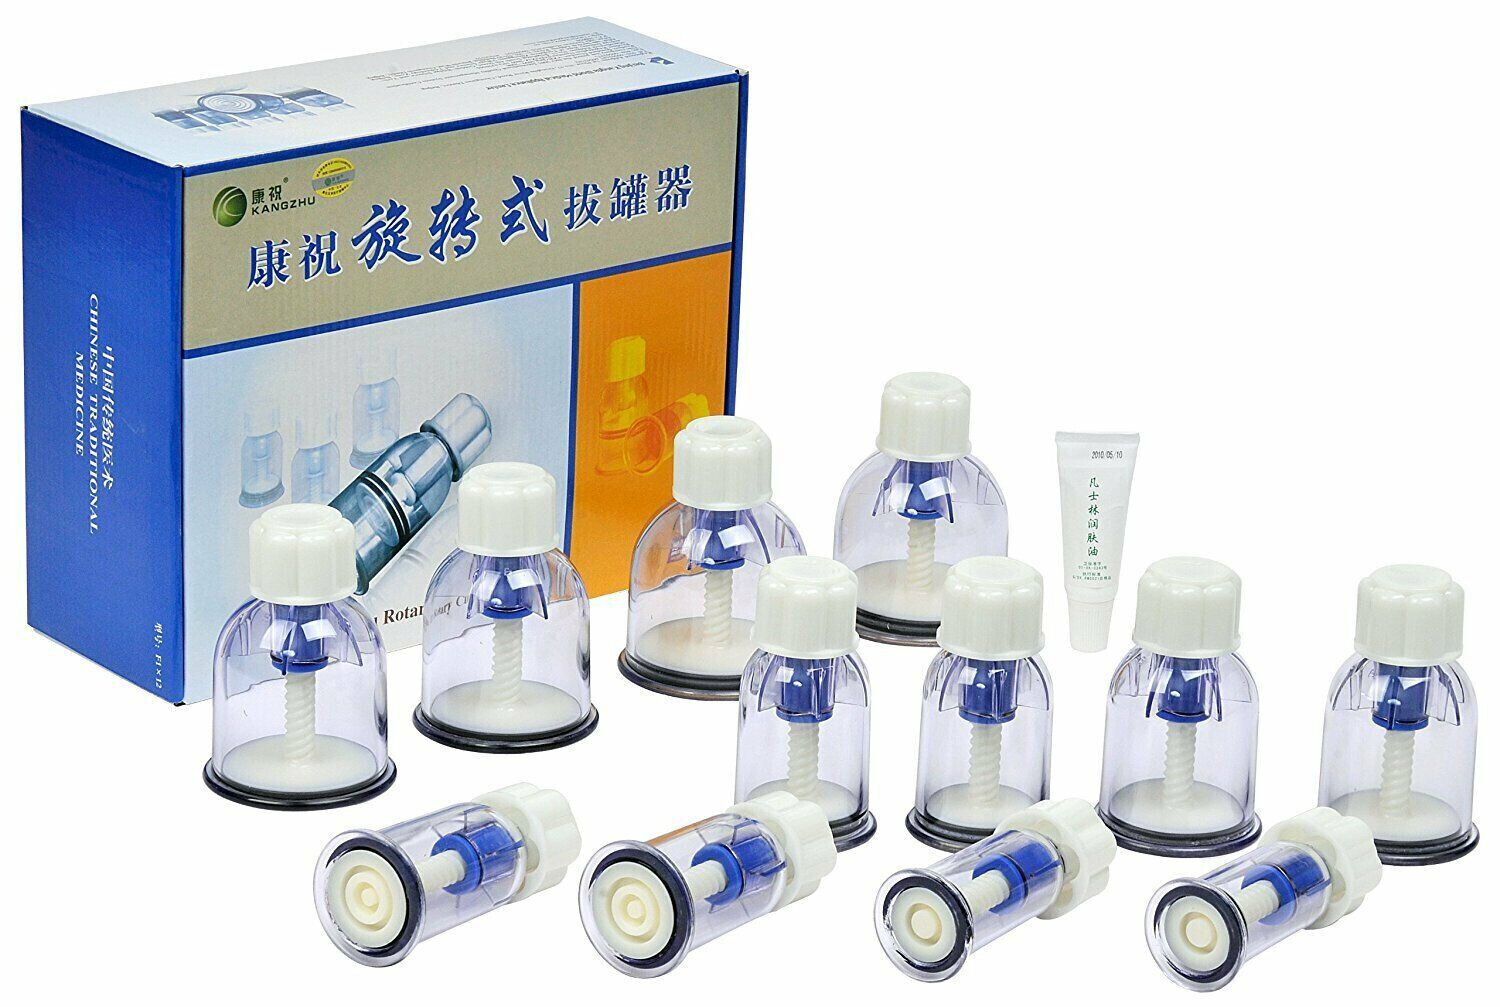 Primary image for Kangzhu Chinese Rotary Cupping Therapy Set - 12 Cup BEST QUALITY